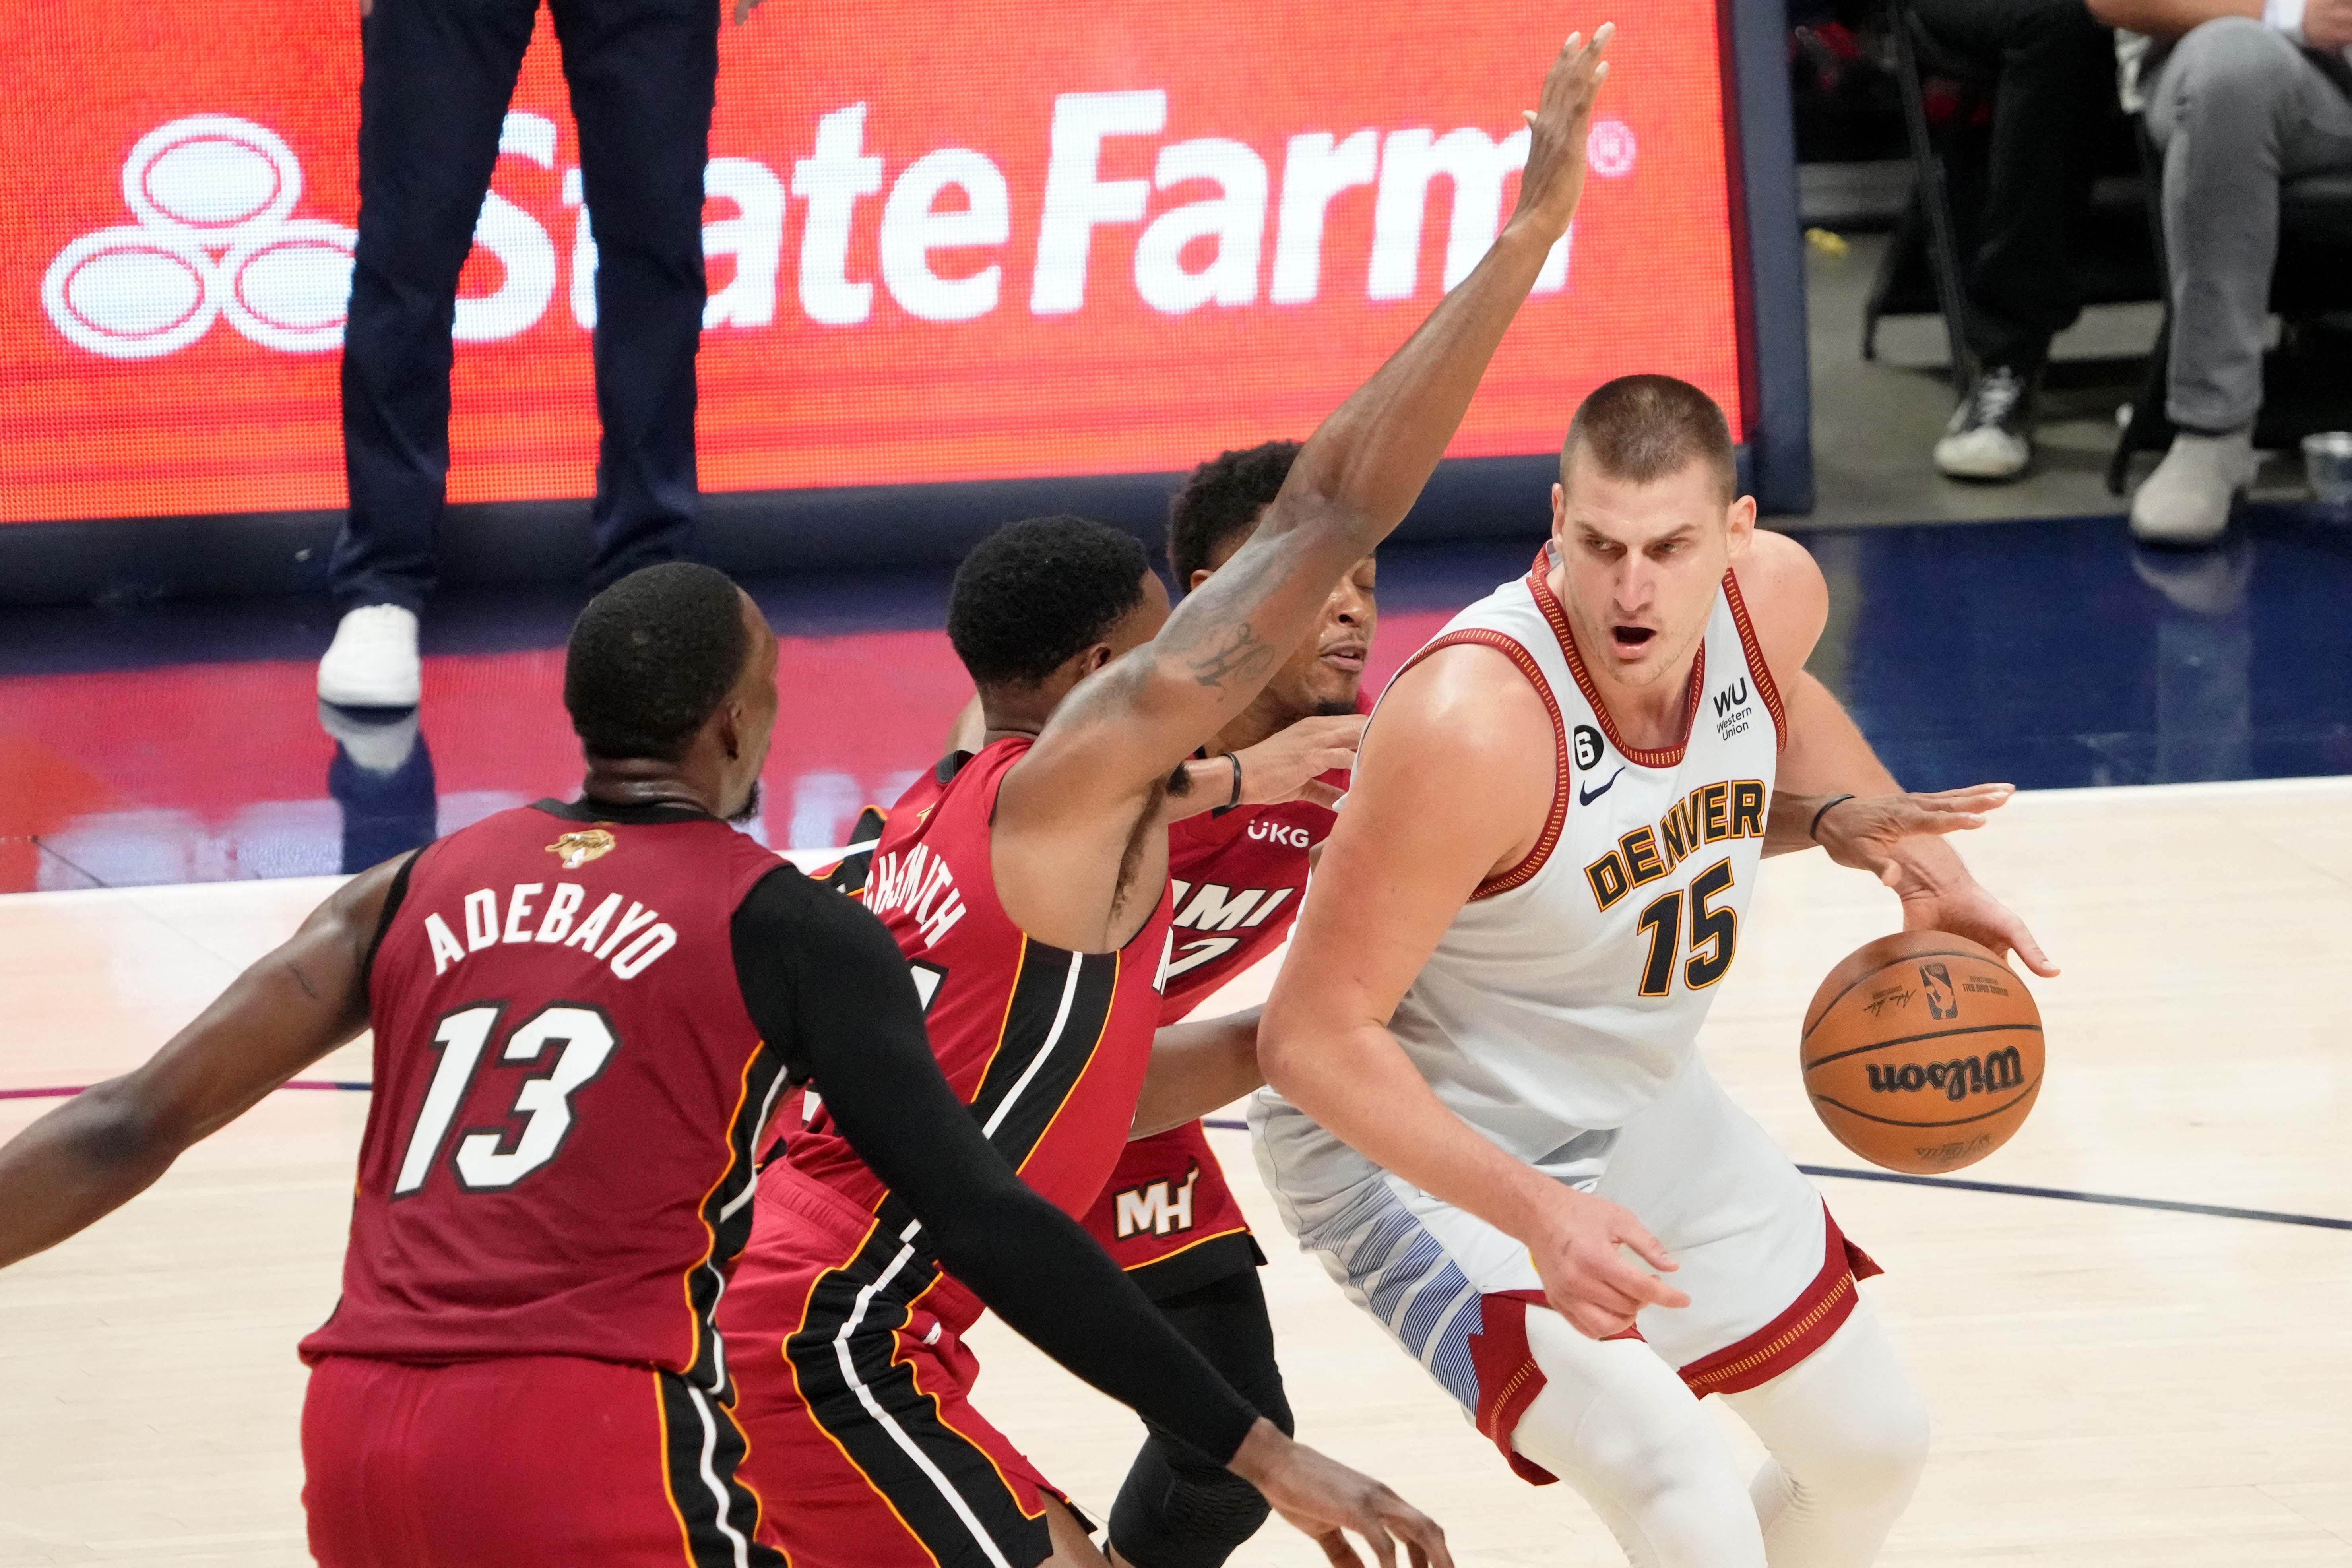 NBA Countdown Presented by DoorDash Airs Live From Denver on ESPN2 and ABC  to Provide Pregame Coverage of the 2023 NBA Finals as the Denver Nuggets  Host the Miami Heat - ESPN